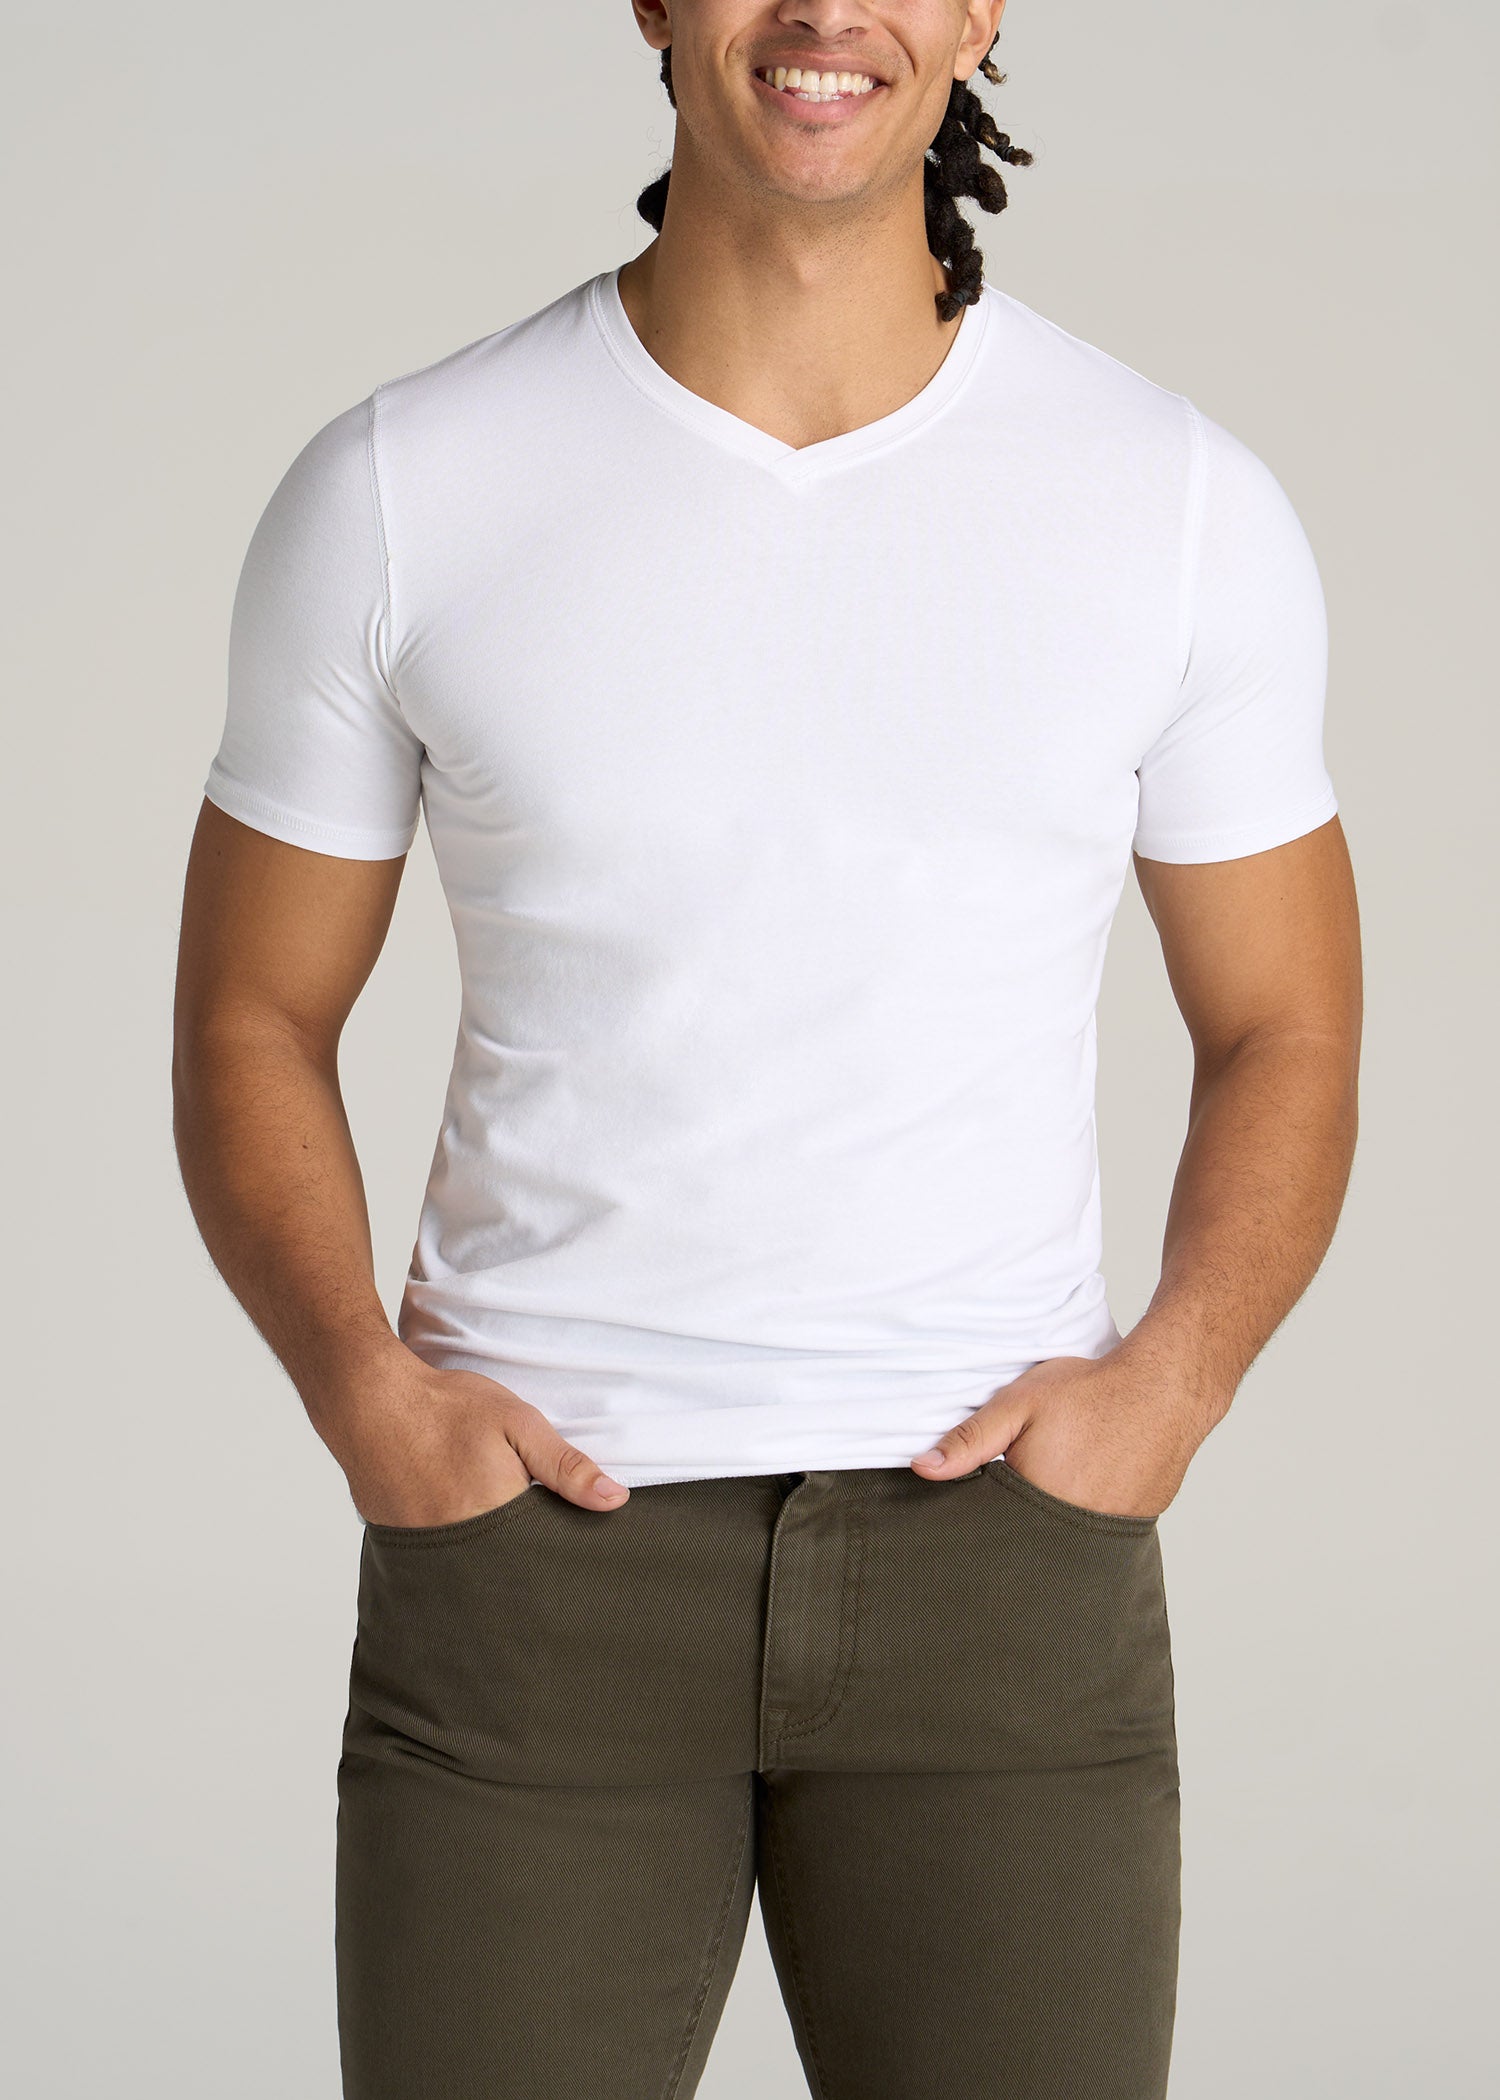 The Essential SLIM-FIT V-Neck Men's Tall Tees in White